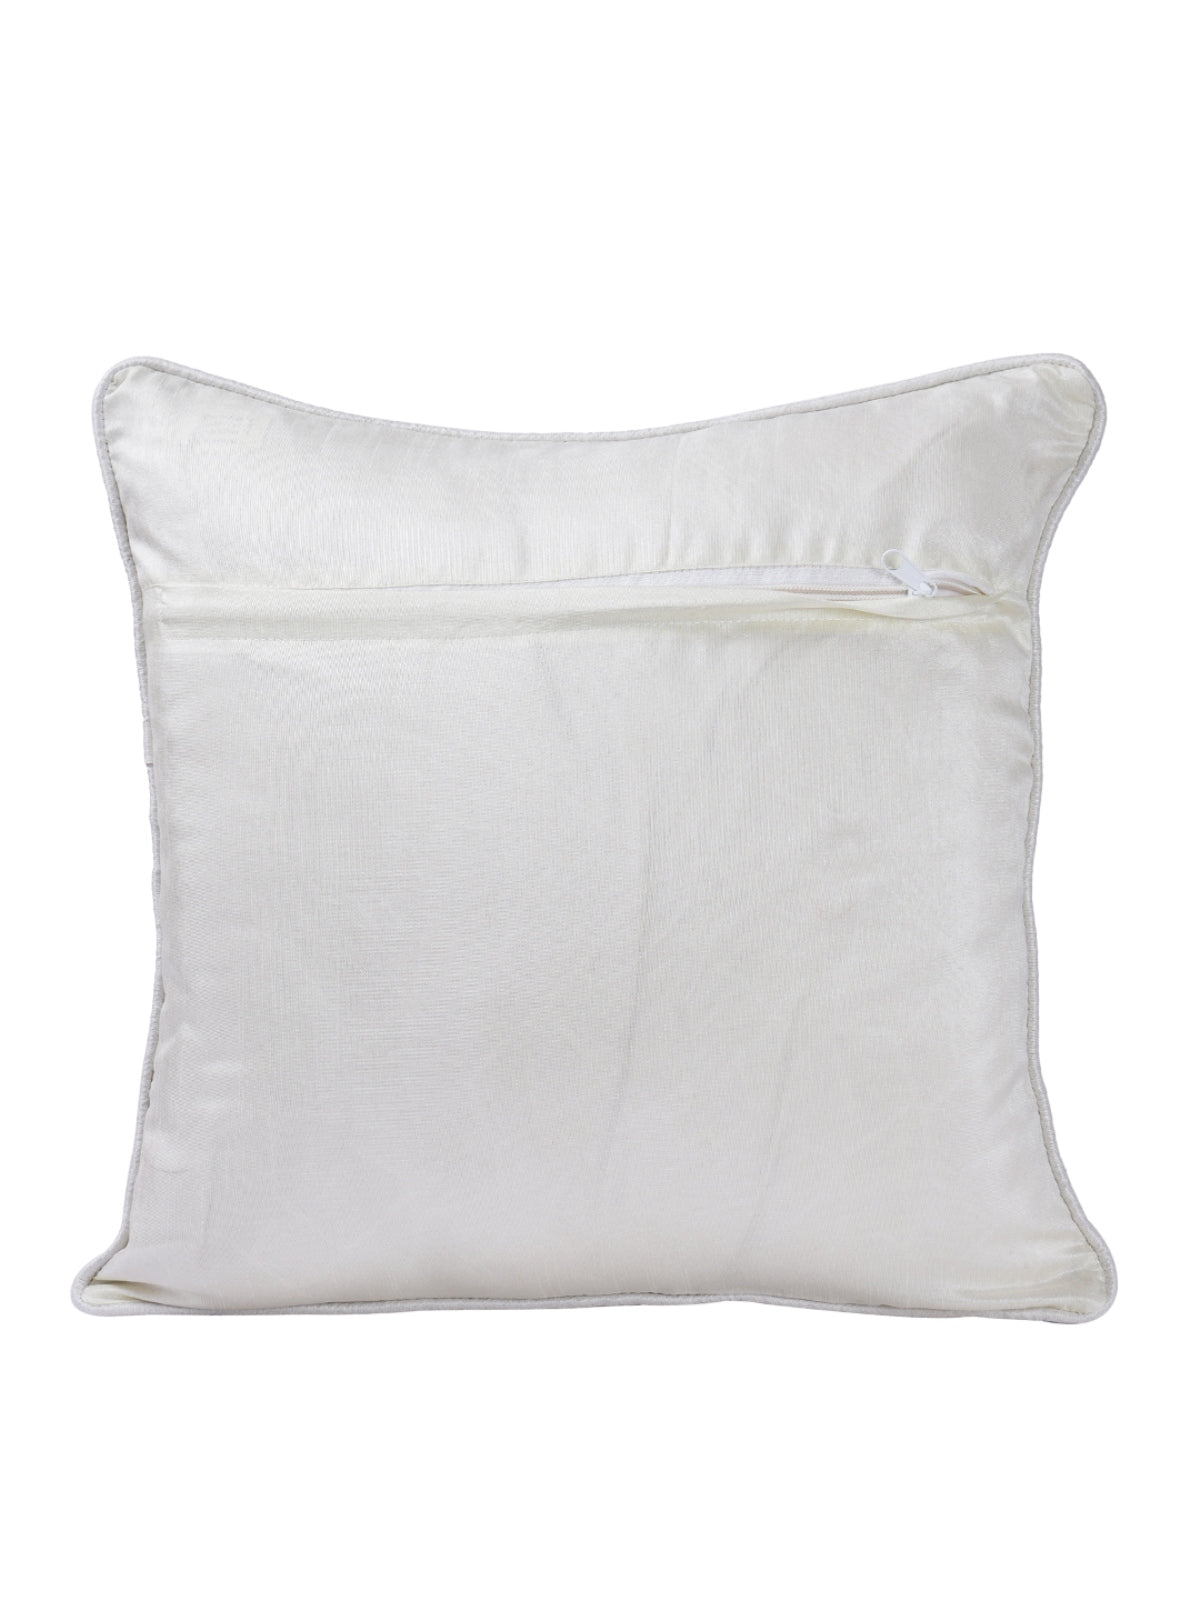 White Set of 5 Cushion Covers